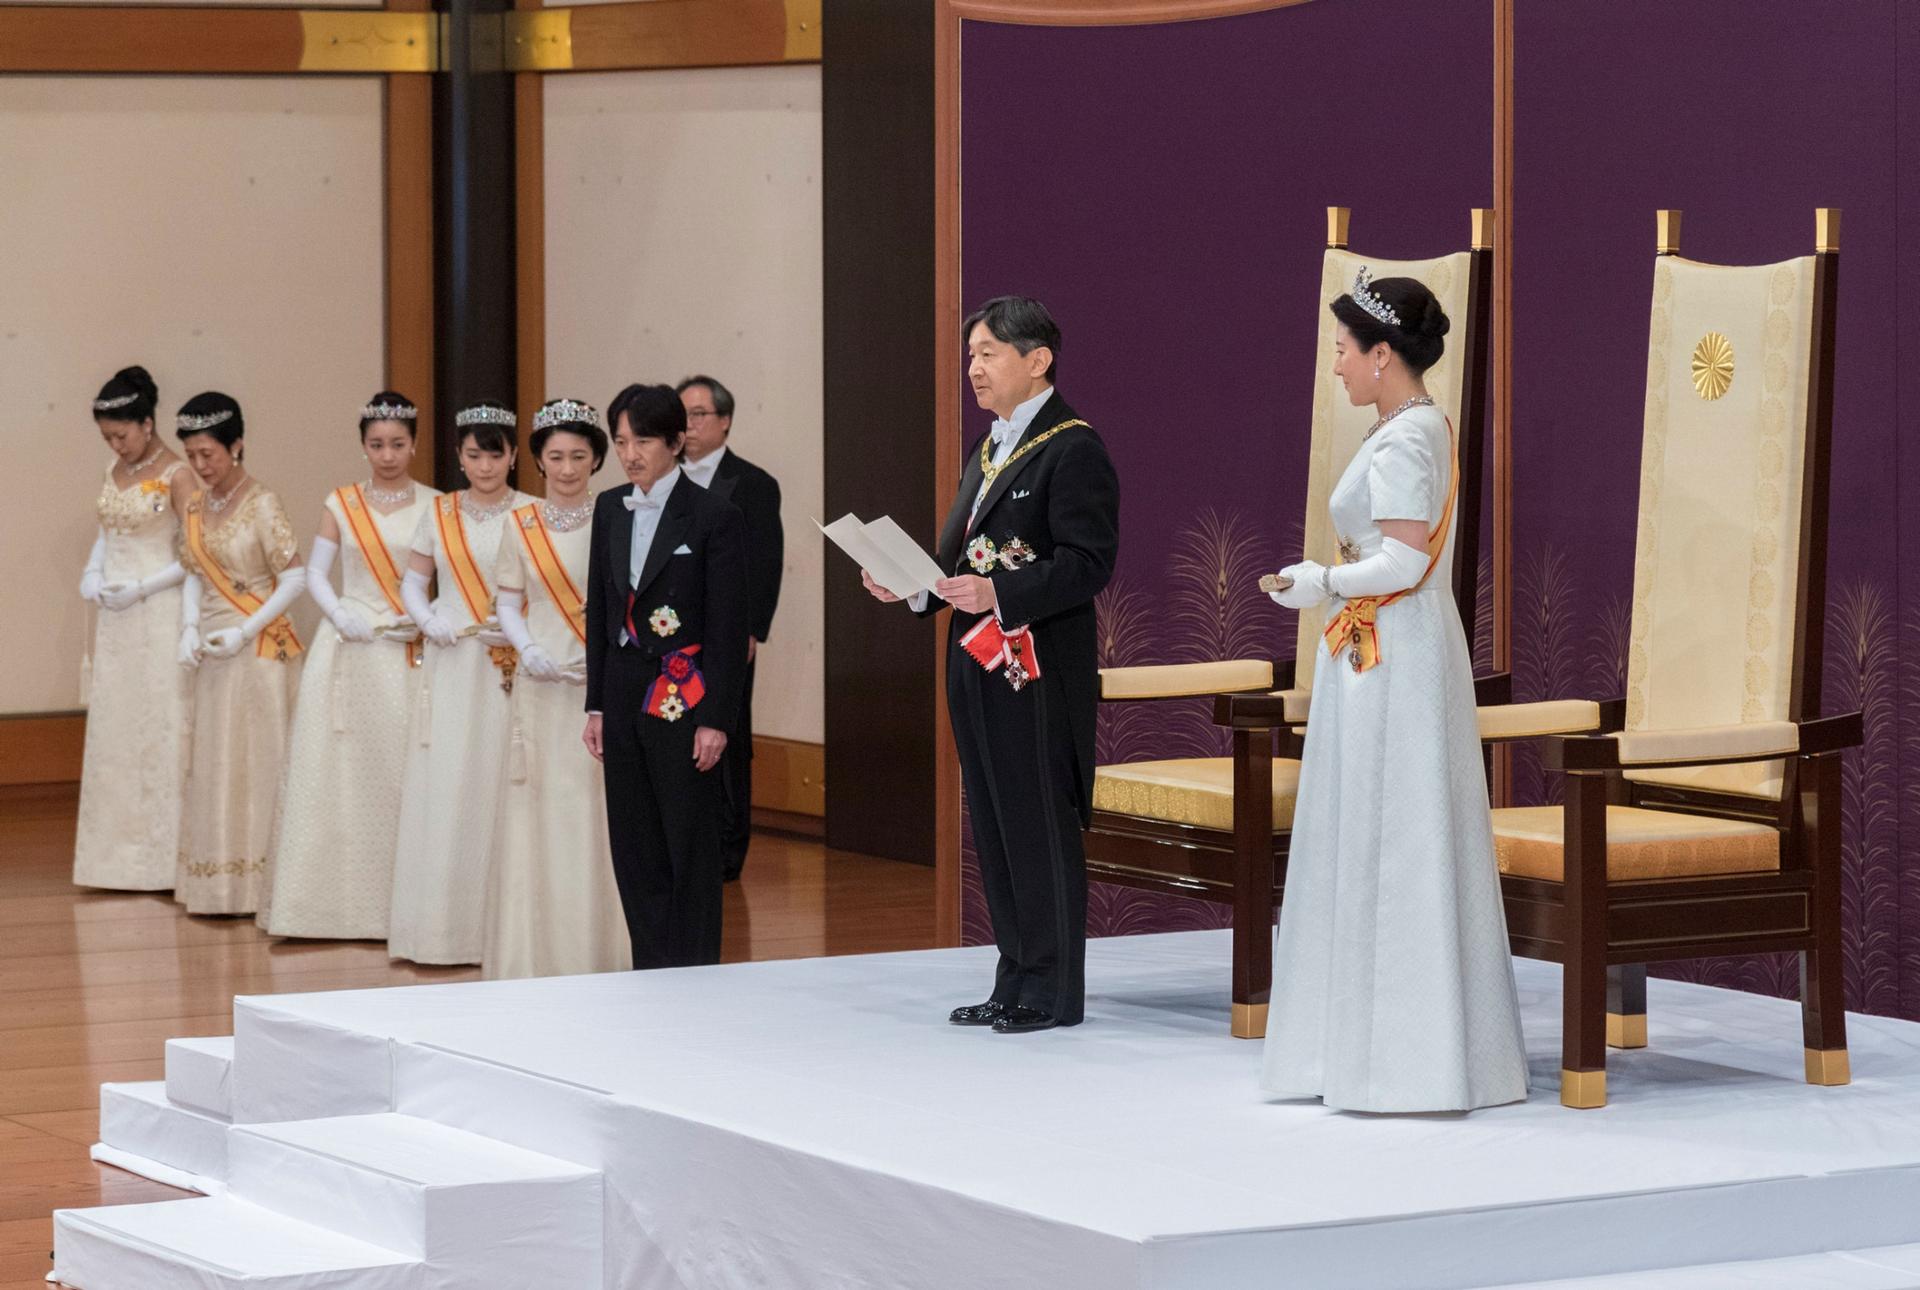 Japan's Emperor Naruhito, flanked by Empress Masako are shown standing on a white platform in front of tall-backed chairs.